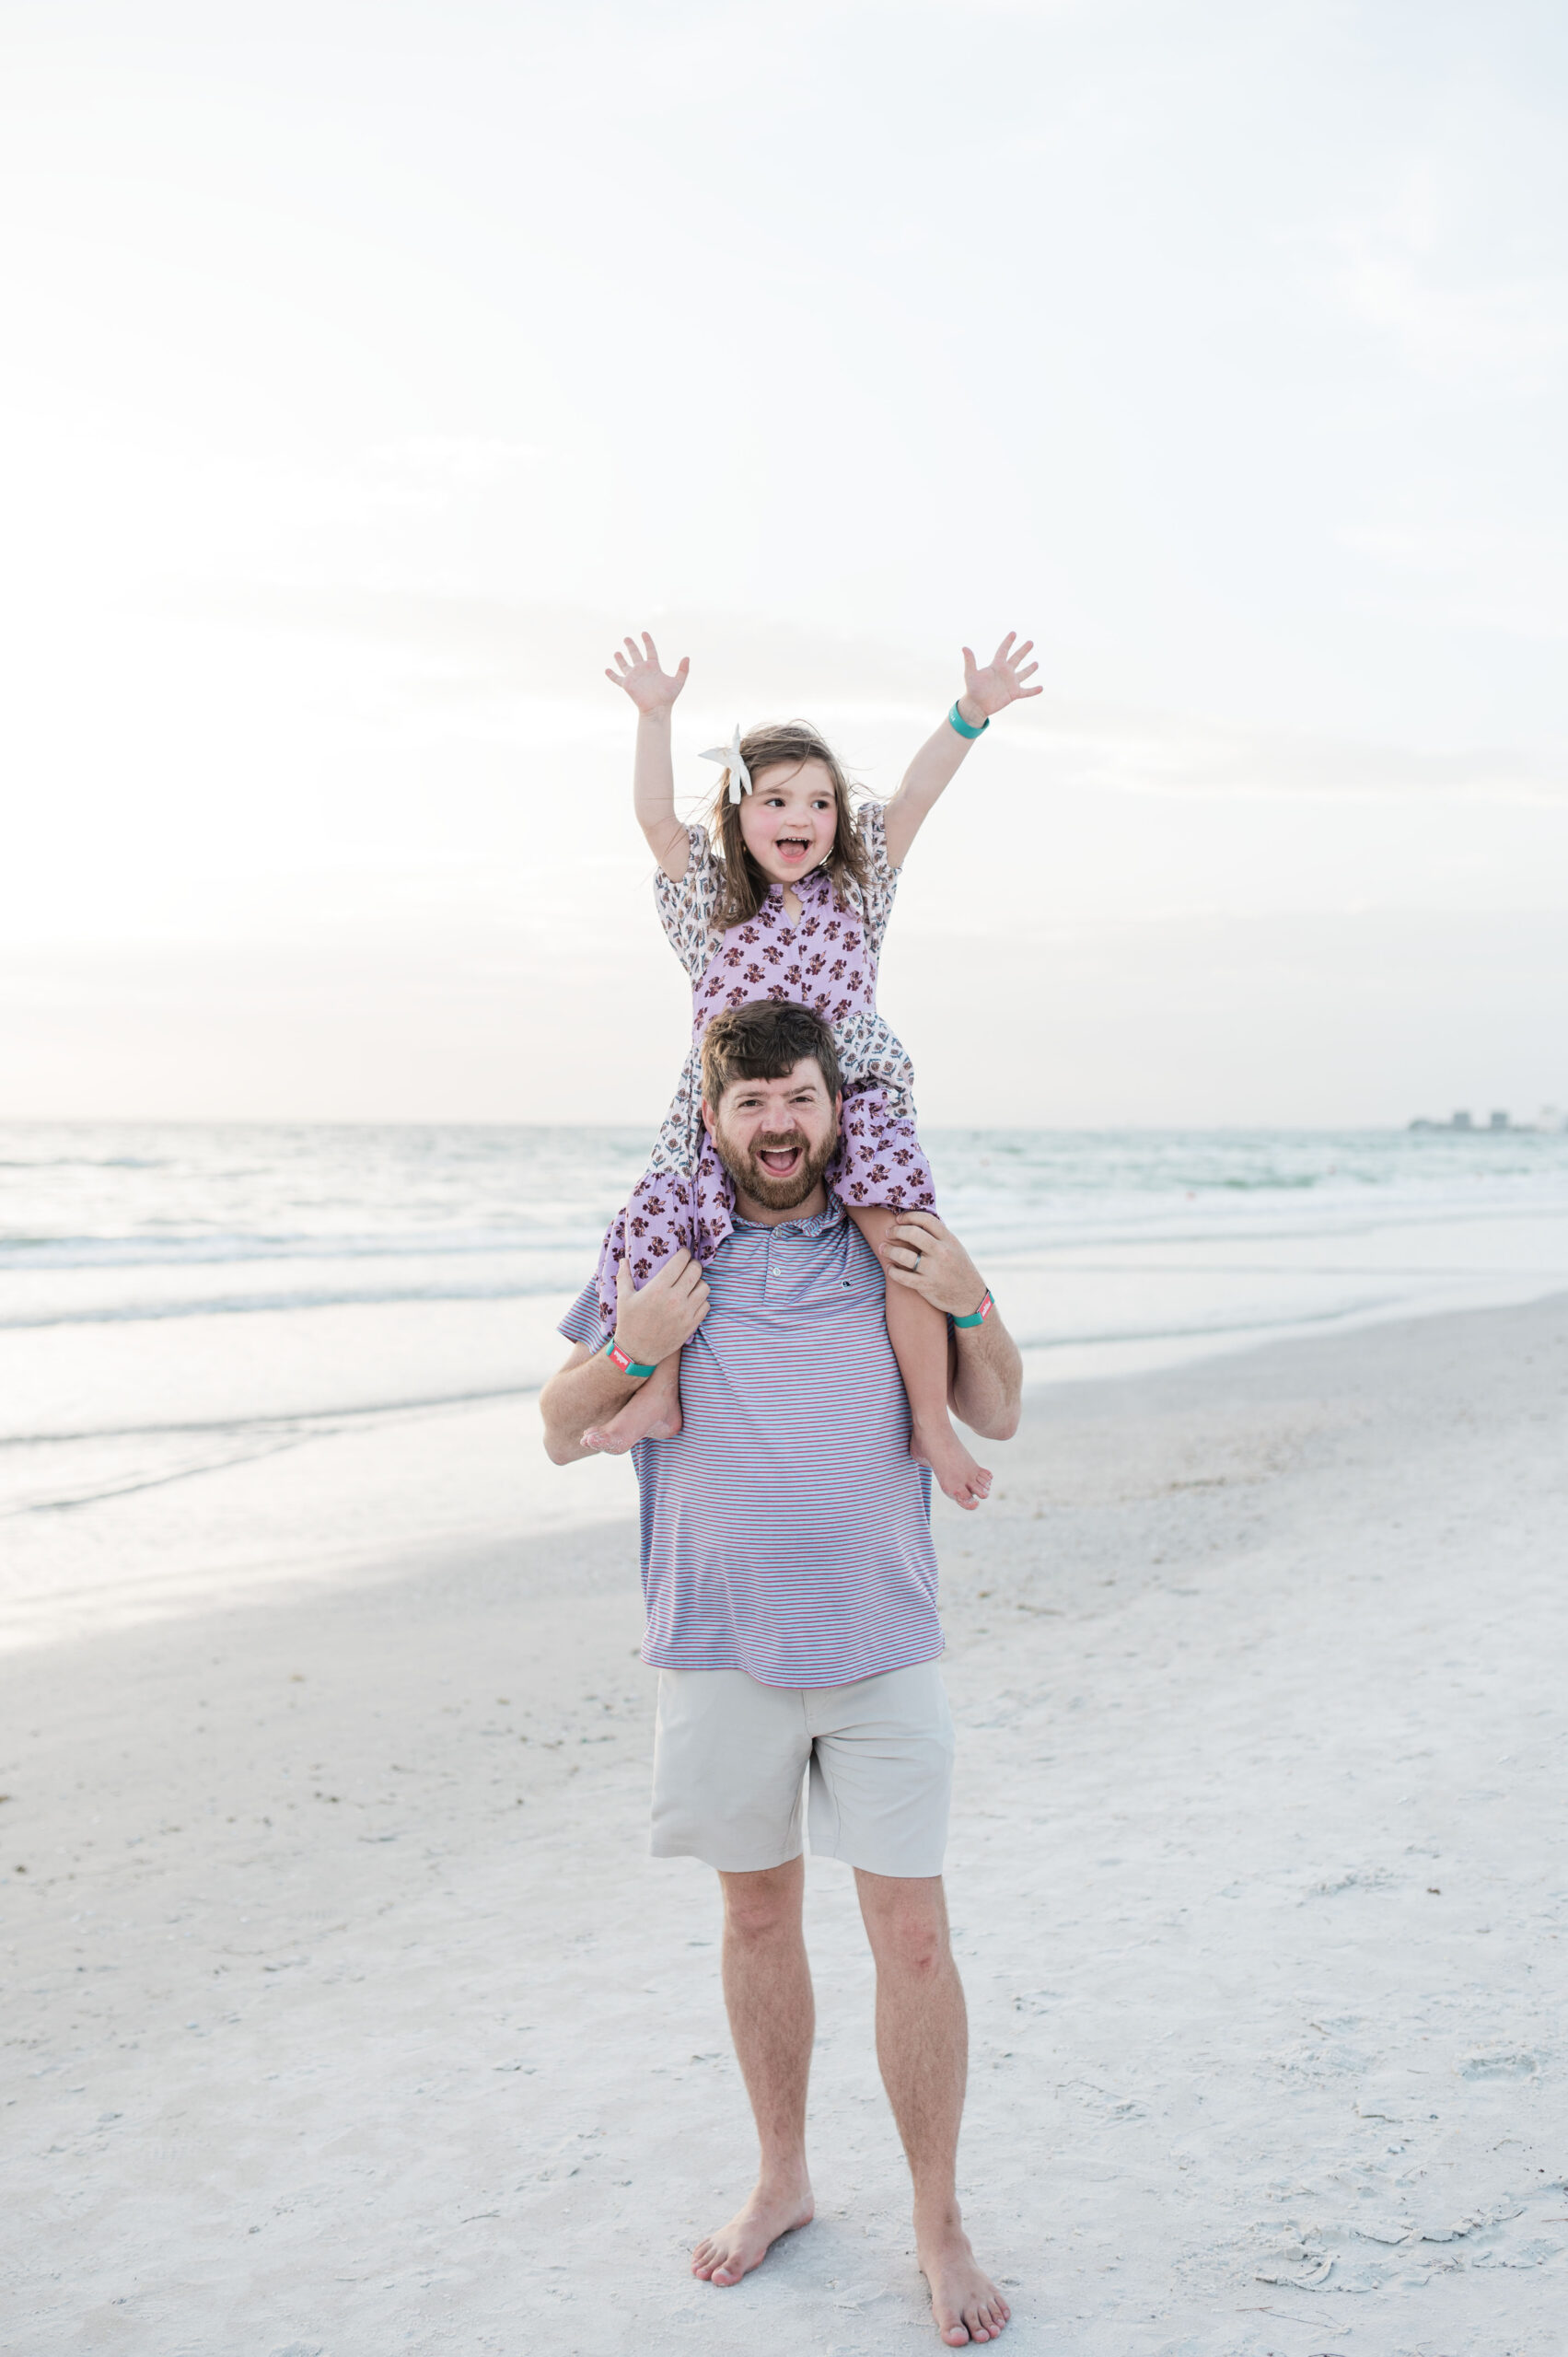 John Naylor and daughter on his shoulders with her hands up on the beach in Saint Pete at the Don Cesar